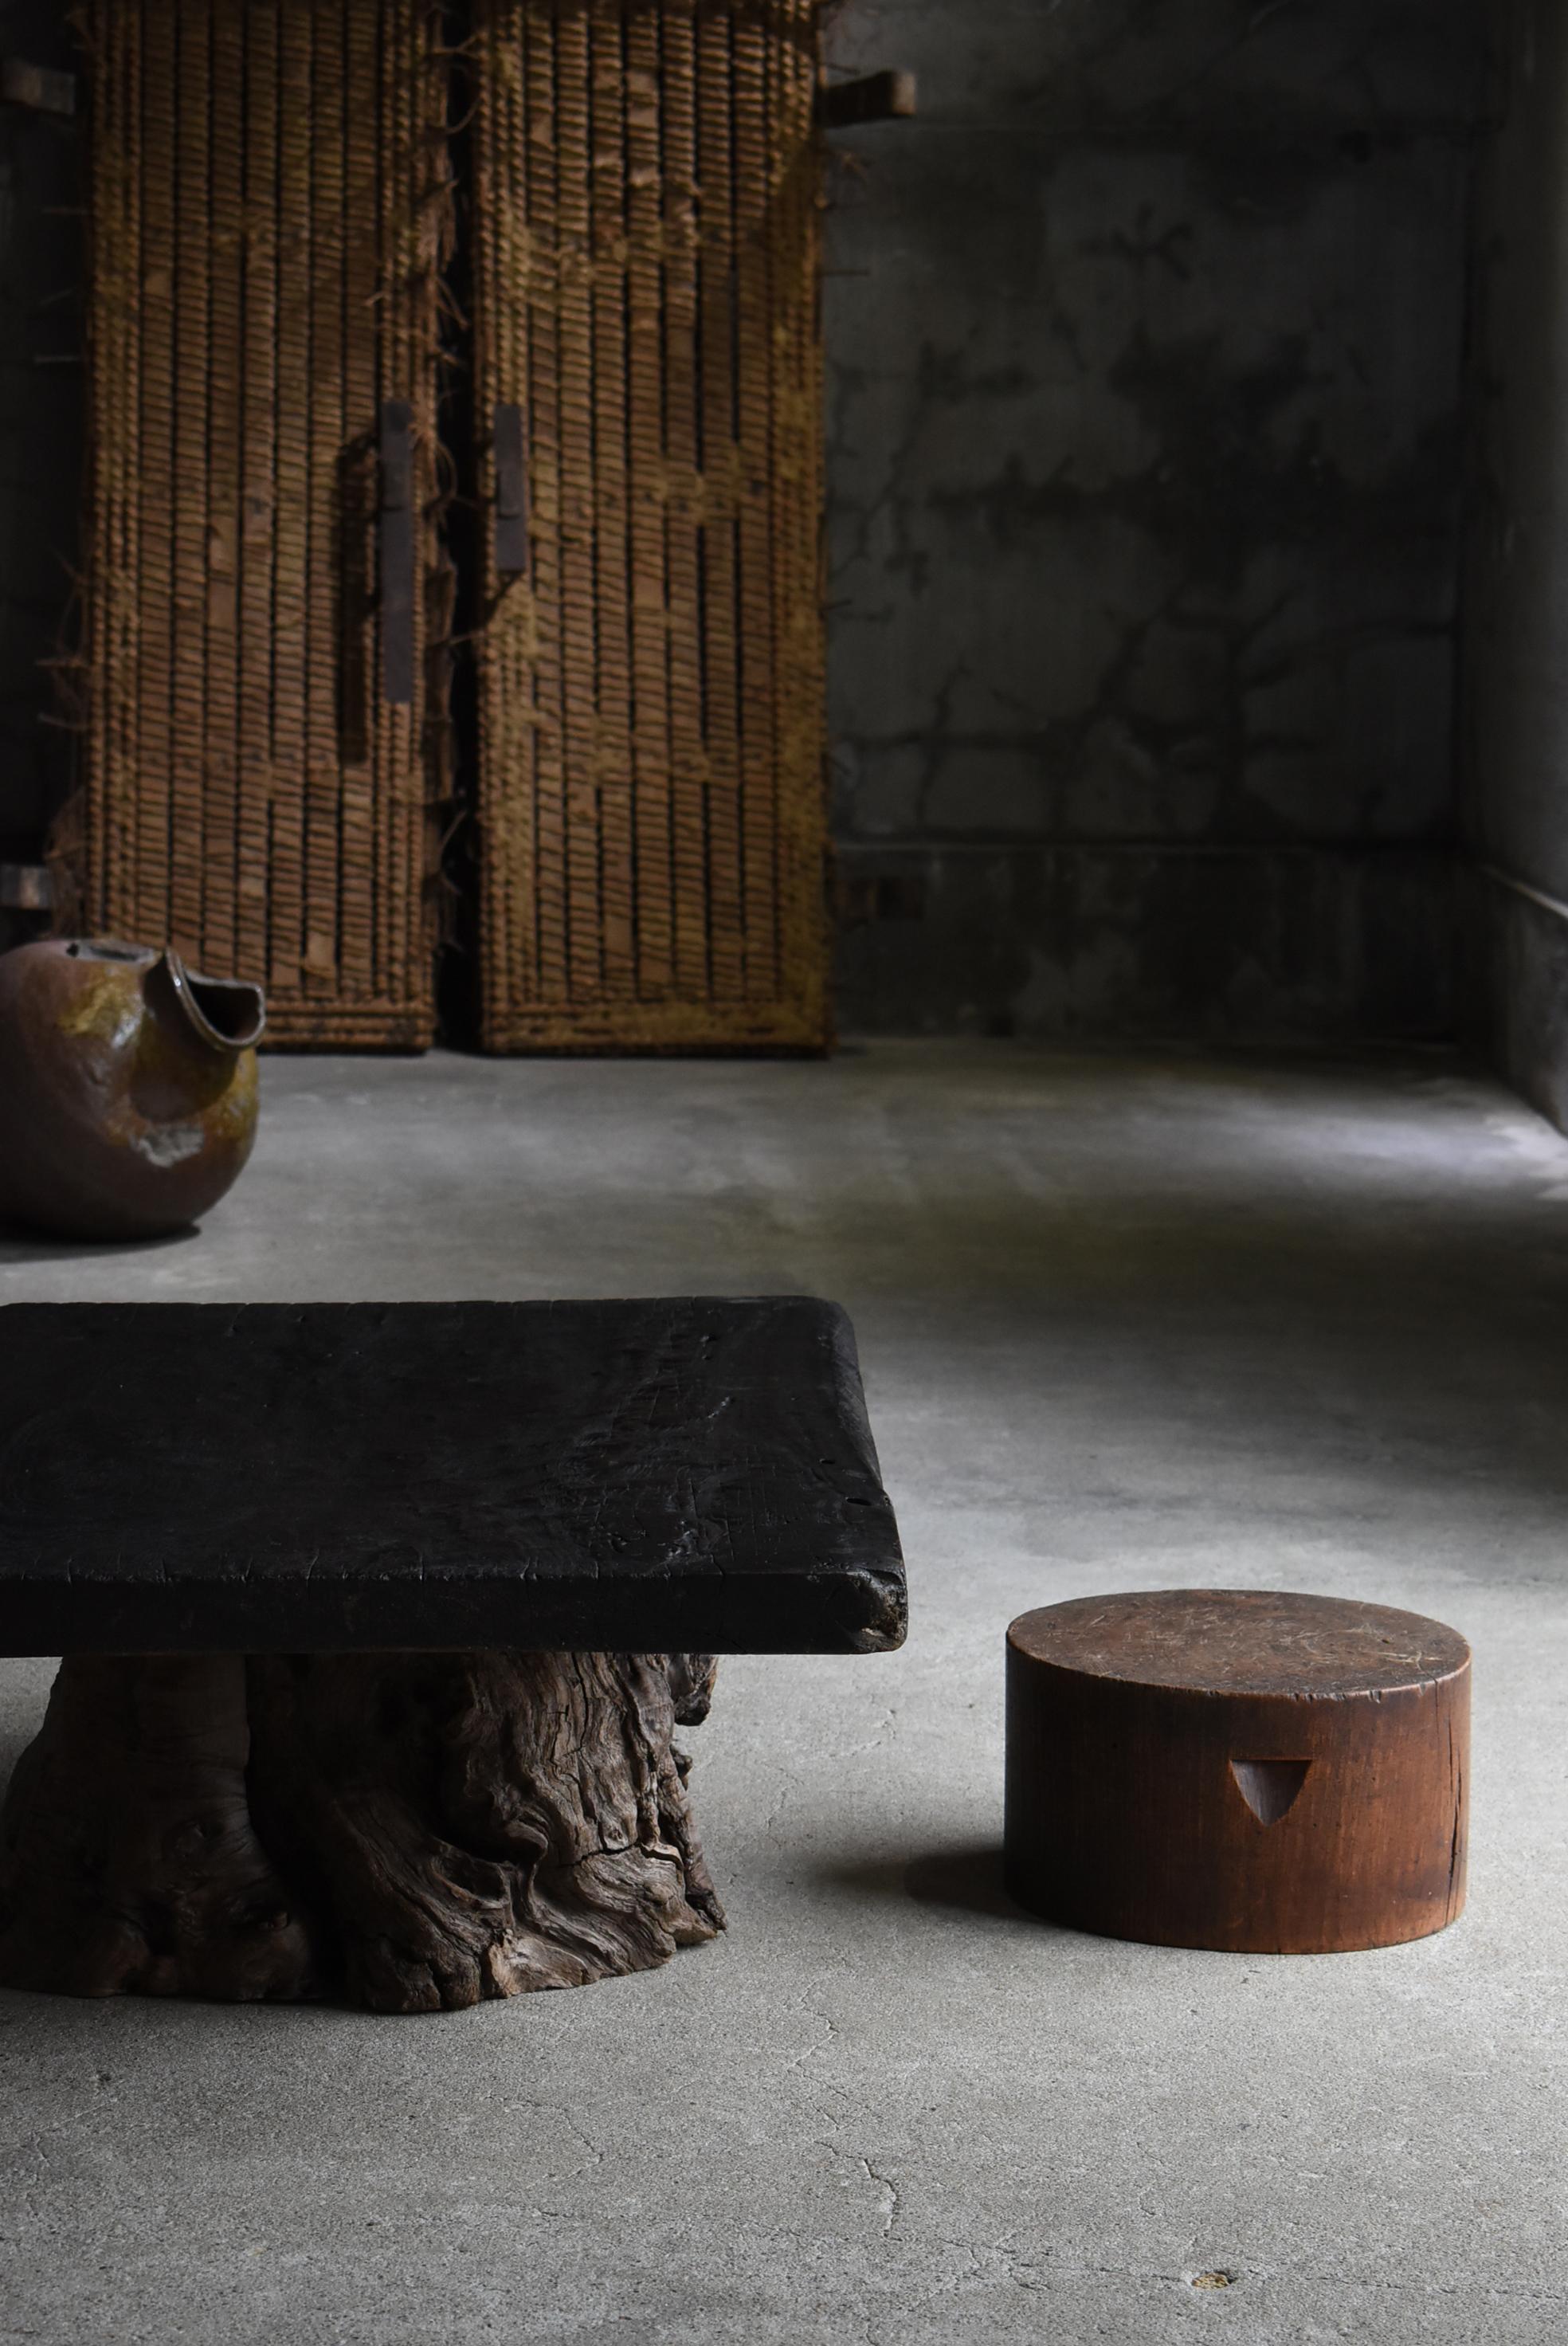 This is a very old Japanese wooden block stool.
It is from the Meiji period (1860s-1900s).
The material is zelkova wood.
It is hard and heavy wood.
The weight is 10 kg.

It is sturdy and stable.

The carved handle makes it easy to move.

It is